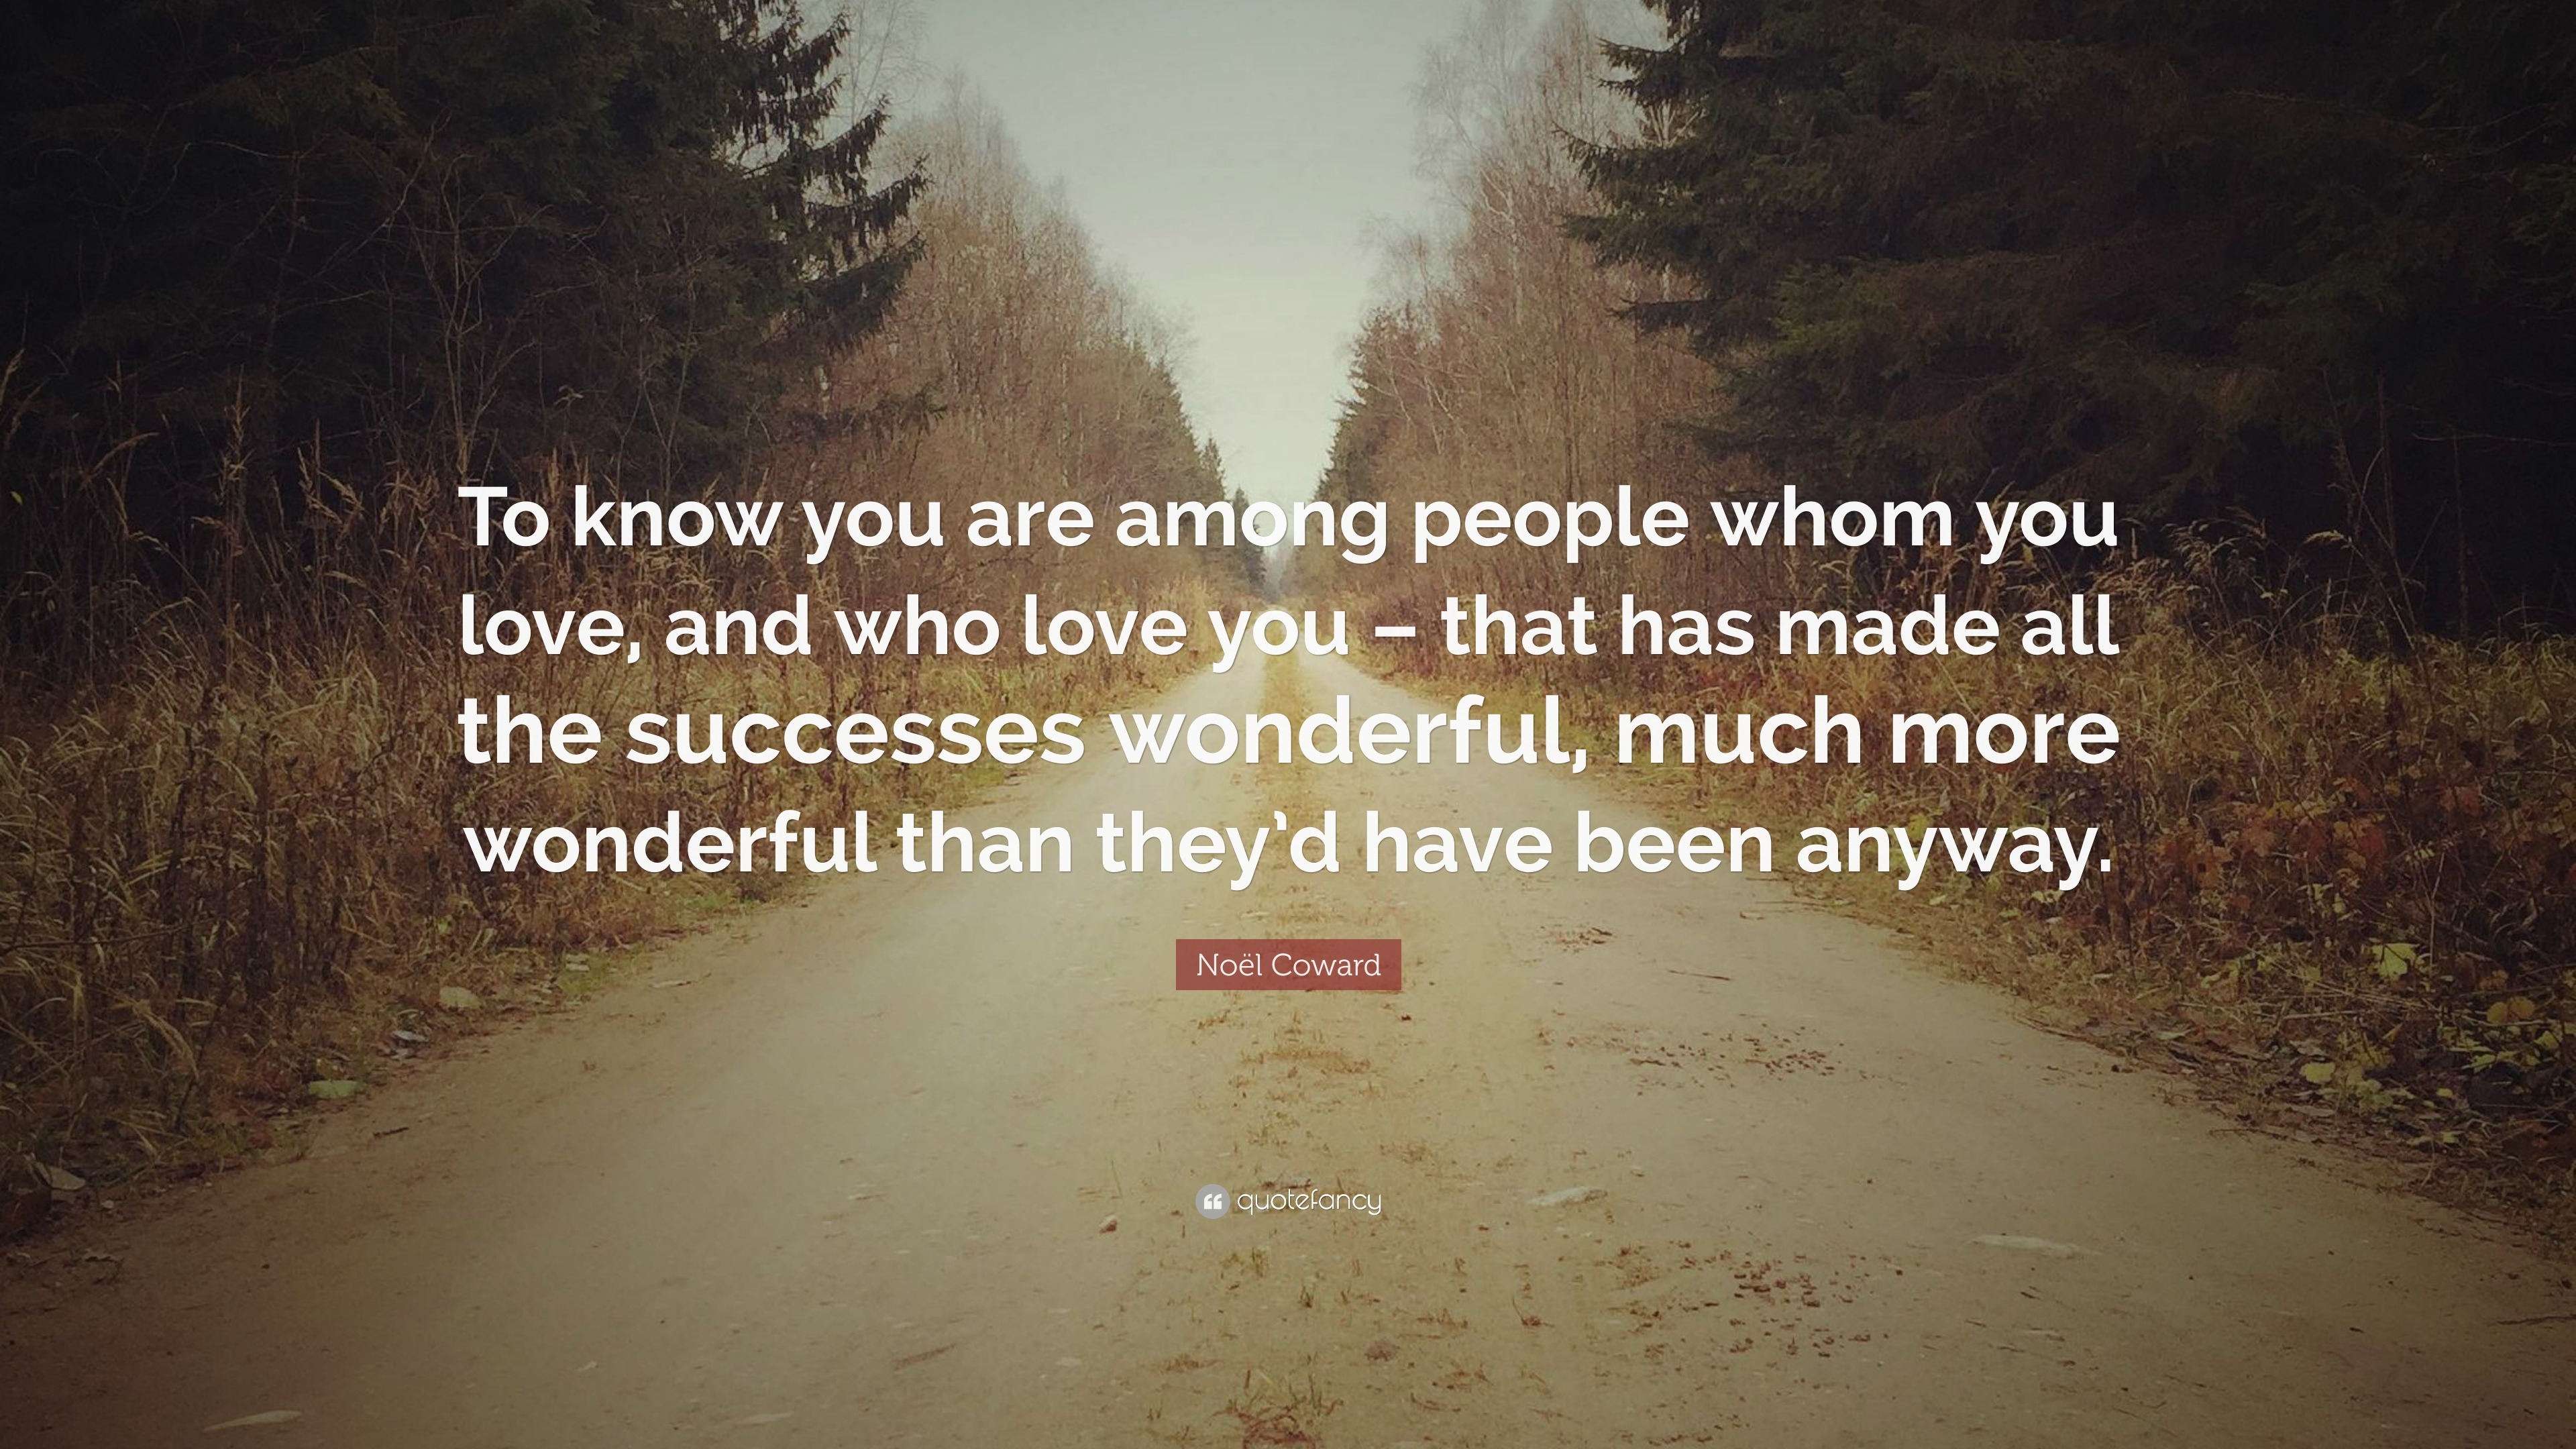 Noël Coward Quote: “To know you are among people whom you love, and who ...